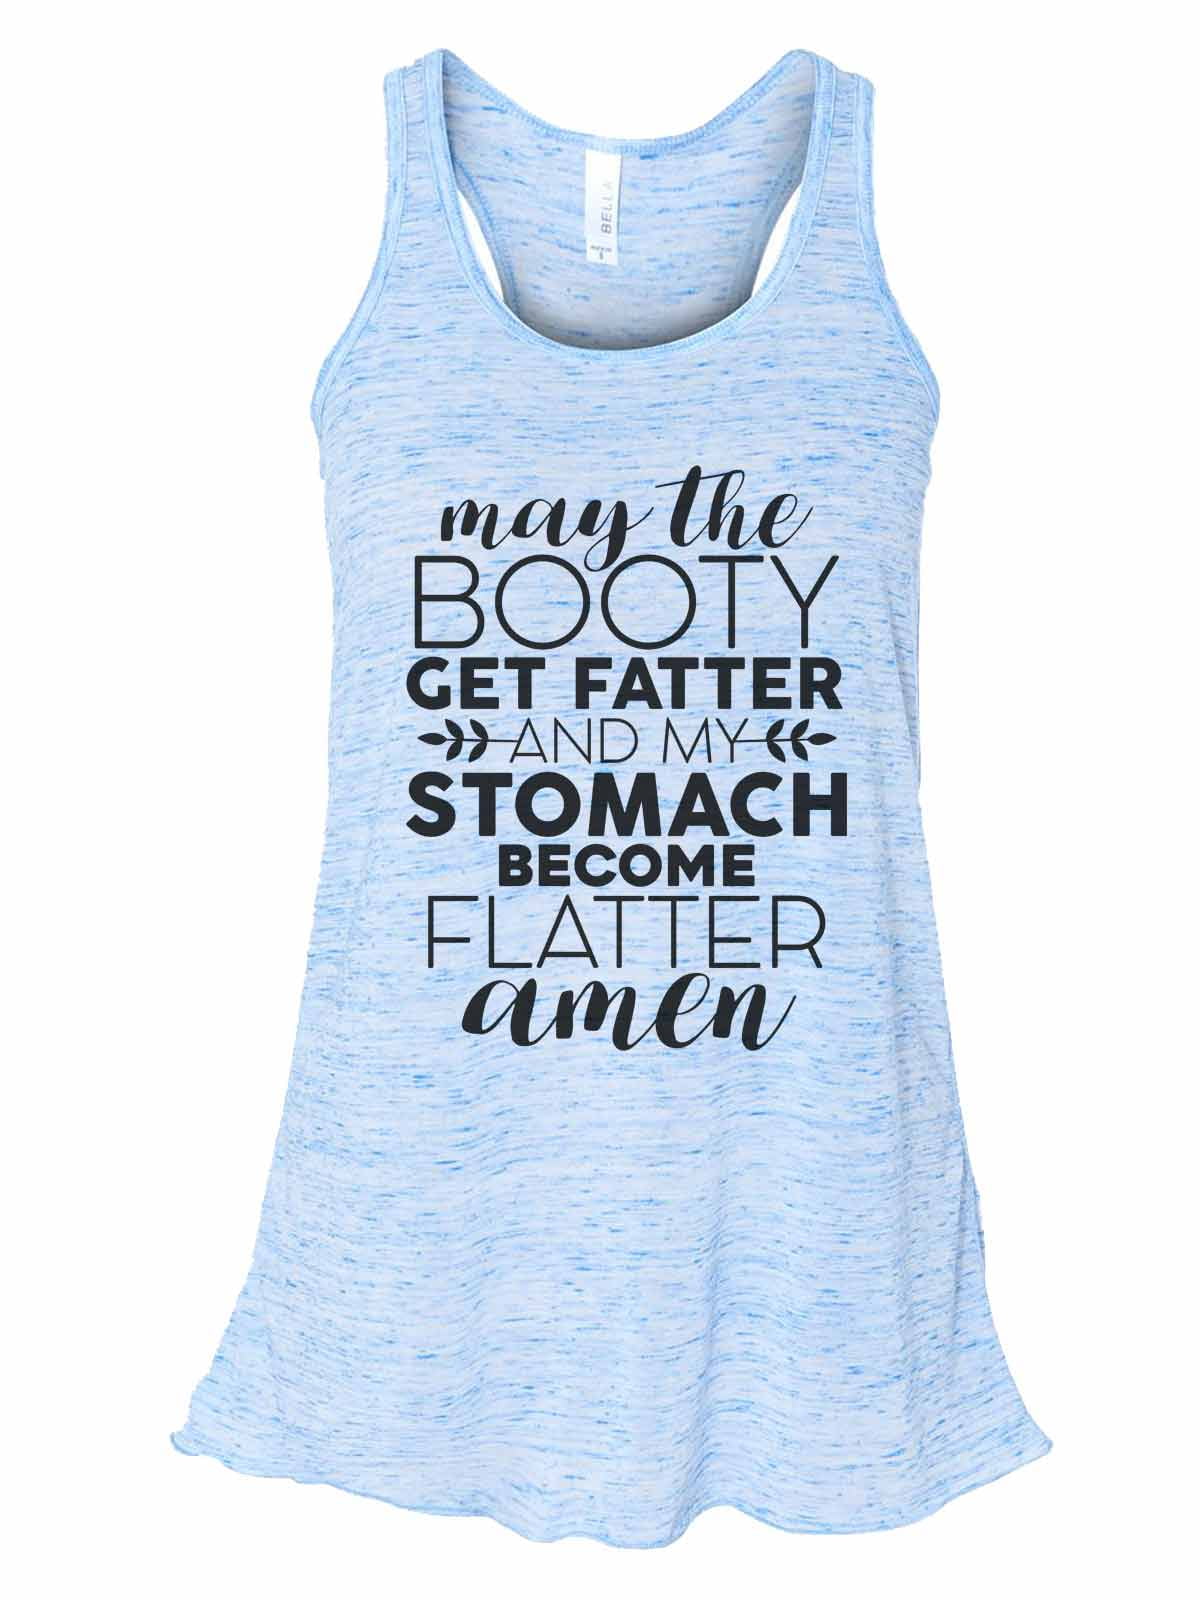 Womenâ€™s Tank Top "May The Booty Get Fatter My Stomach Become Flatter Amen" Small, Blue -